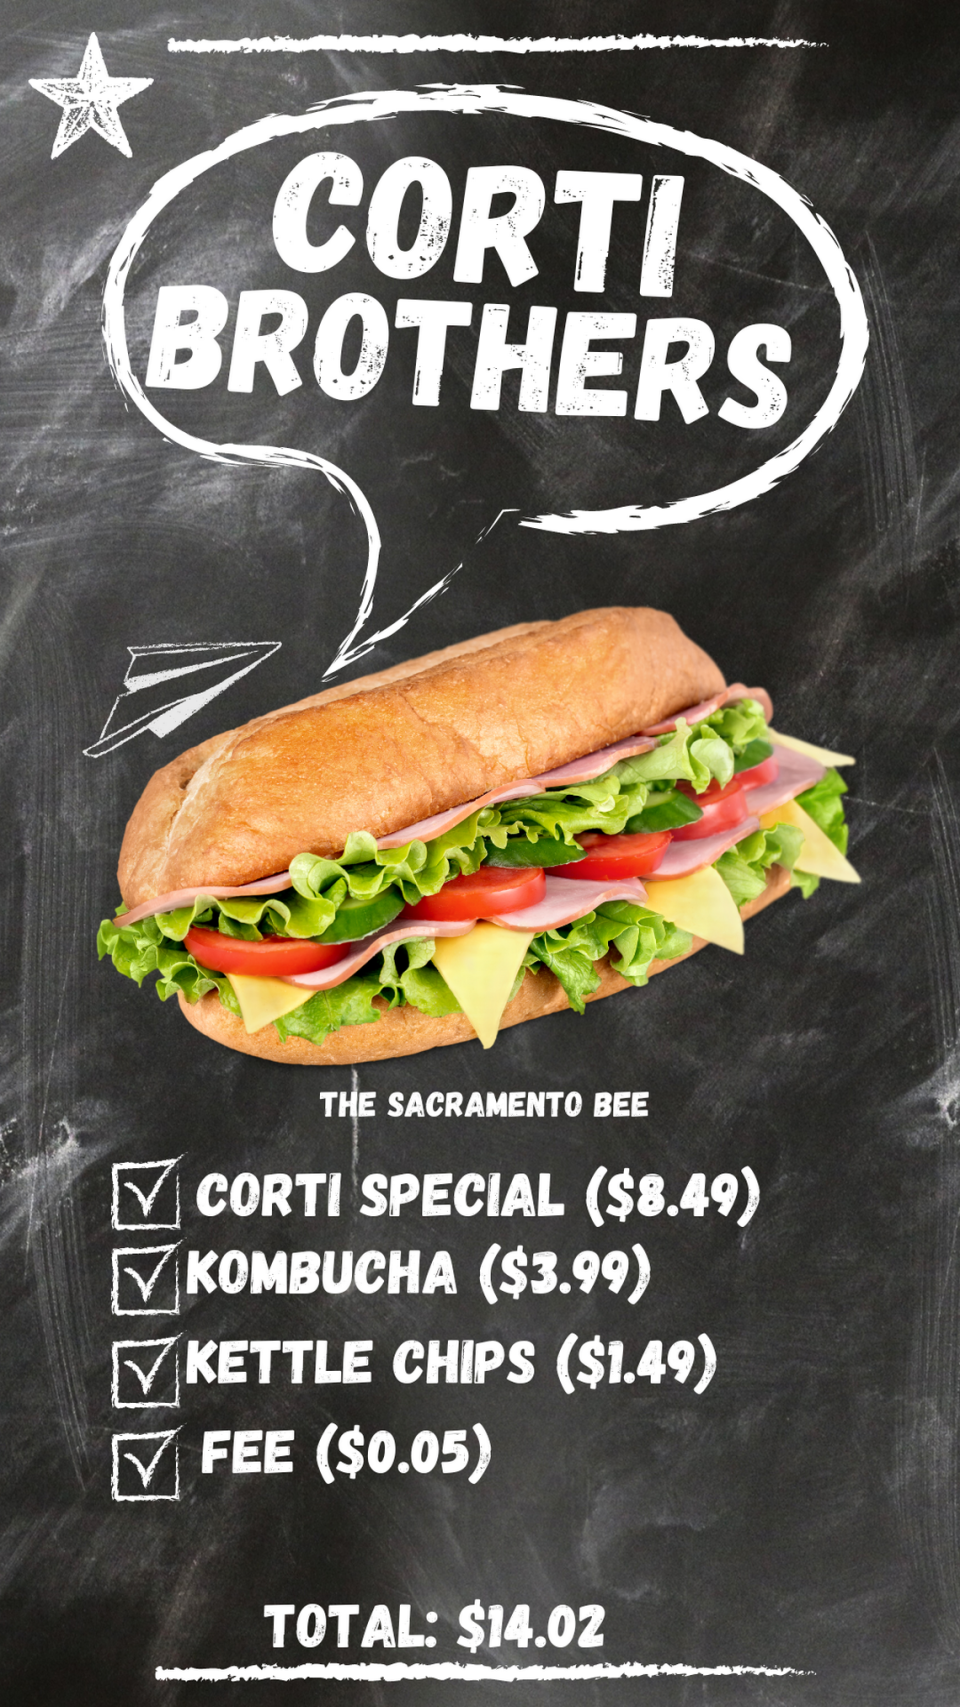 Service journalism reporter Brianna Taylor visits Corti Brothers at 5810 Folsom Blvd., Sacramento on May 13, 2023, with $25. She spends a little more than half her budget on a sandwich, a bag of chips and a drink.